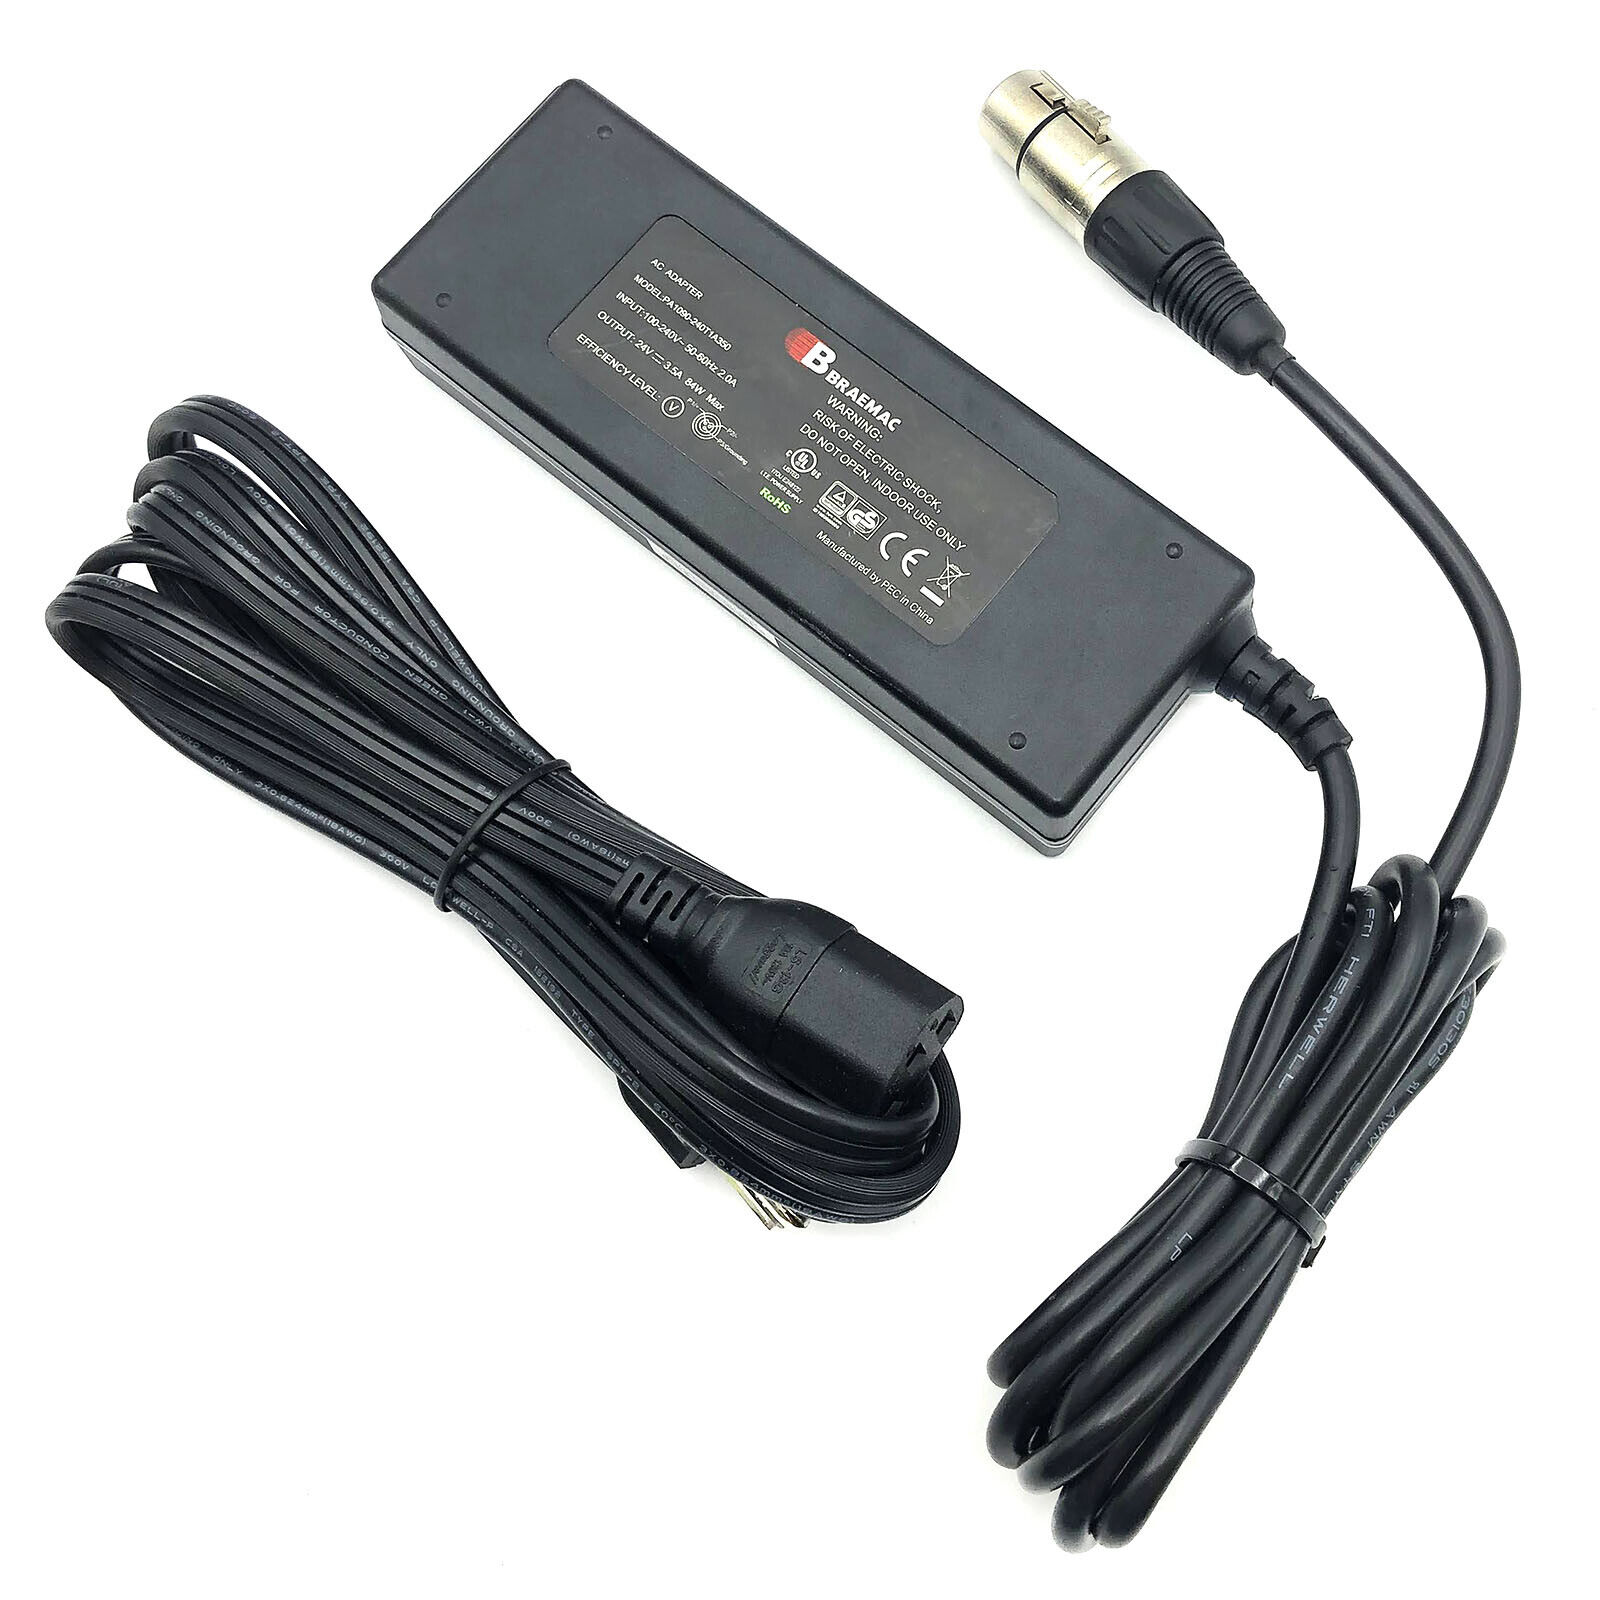 NEW Braemac 24V 3A Power Supply for Marshall V-R201P-AFHD LCD Monitor 4-pin XLR Brand: Braemac Type: AC DC Adapter - Click Image to Close